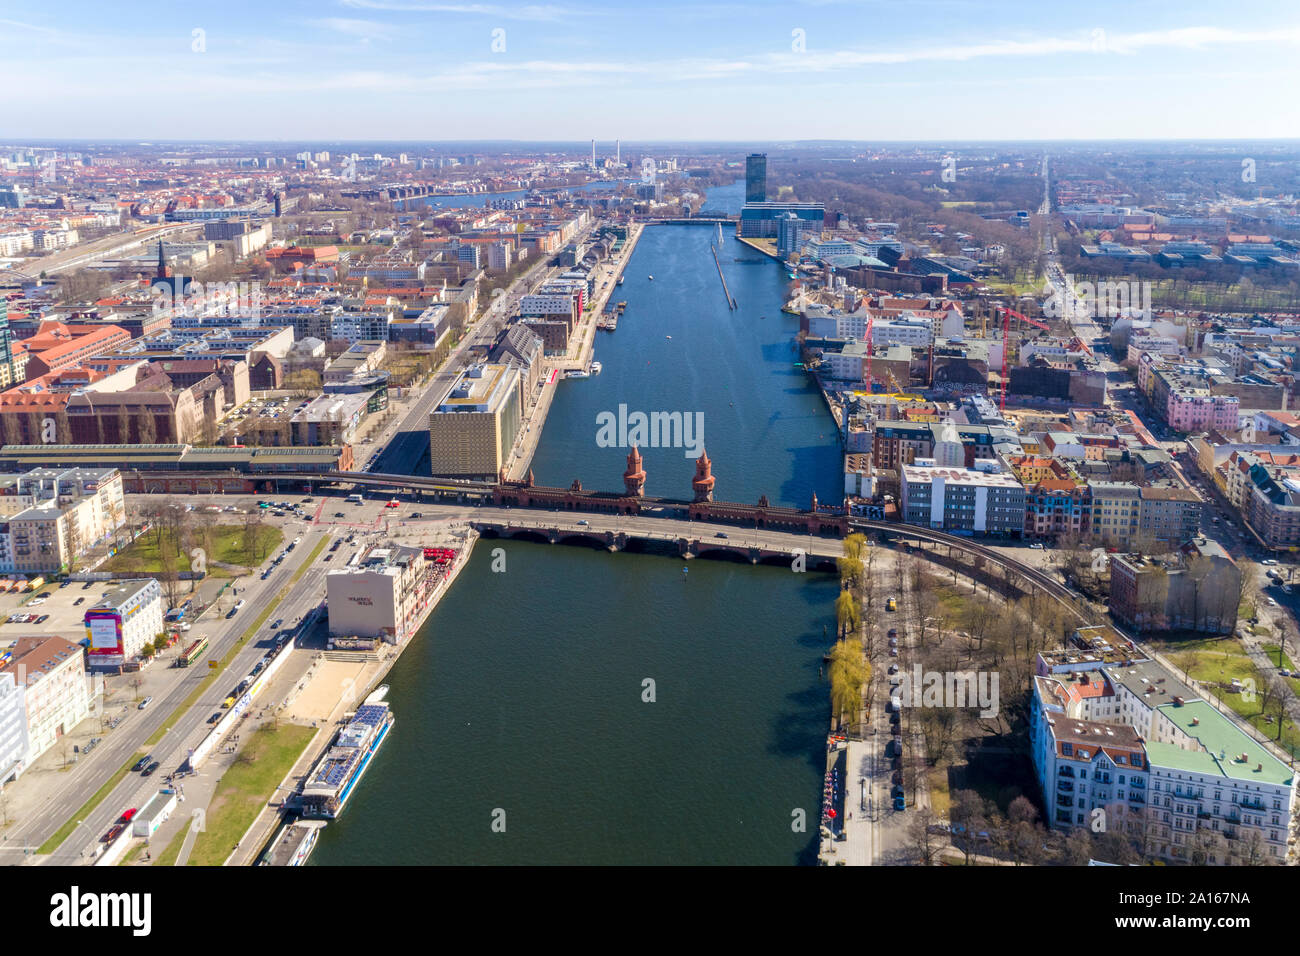 High angle view of Oberbaumbruecke Bridge over river in city Stock Photo